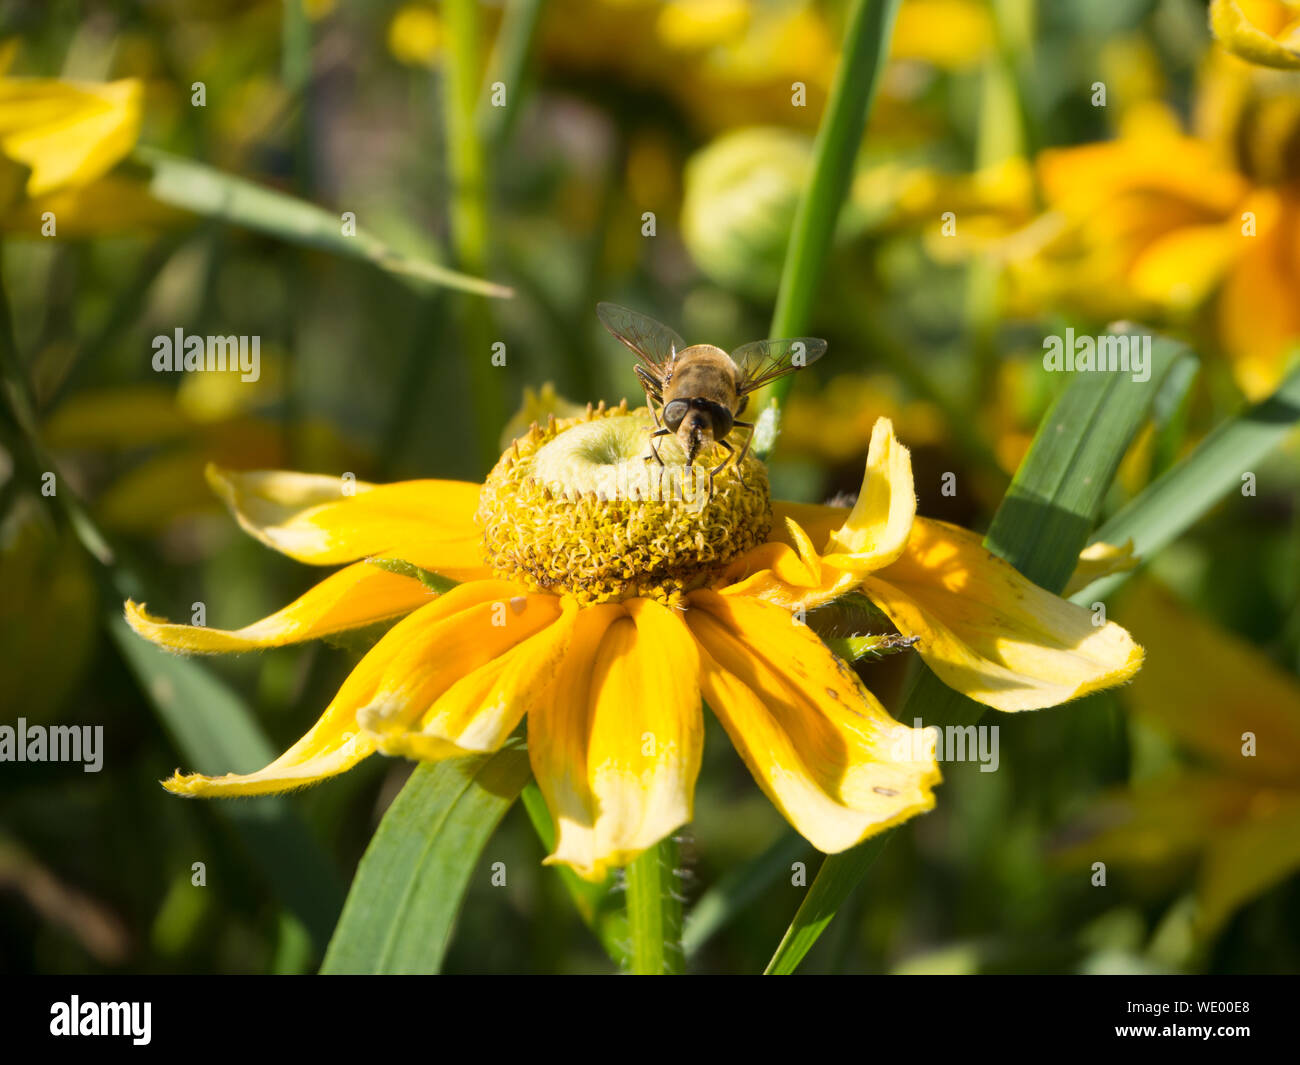 Close-up Of Bee On Flowers Against Blurred Background Stock Photo